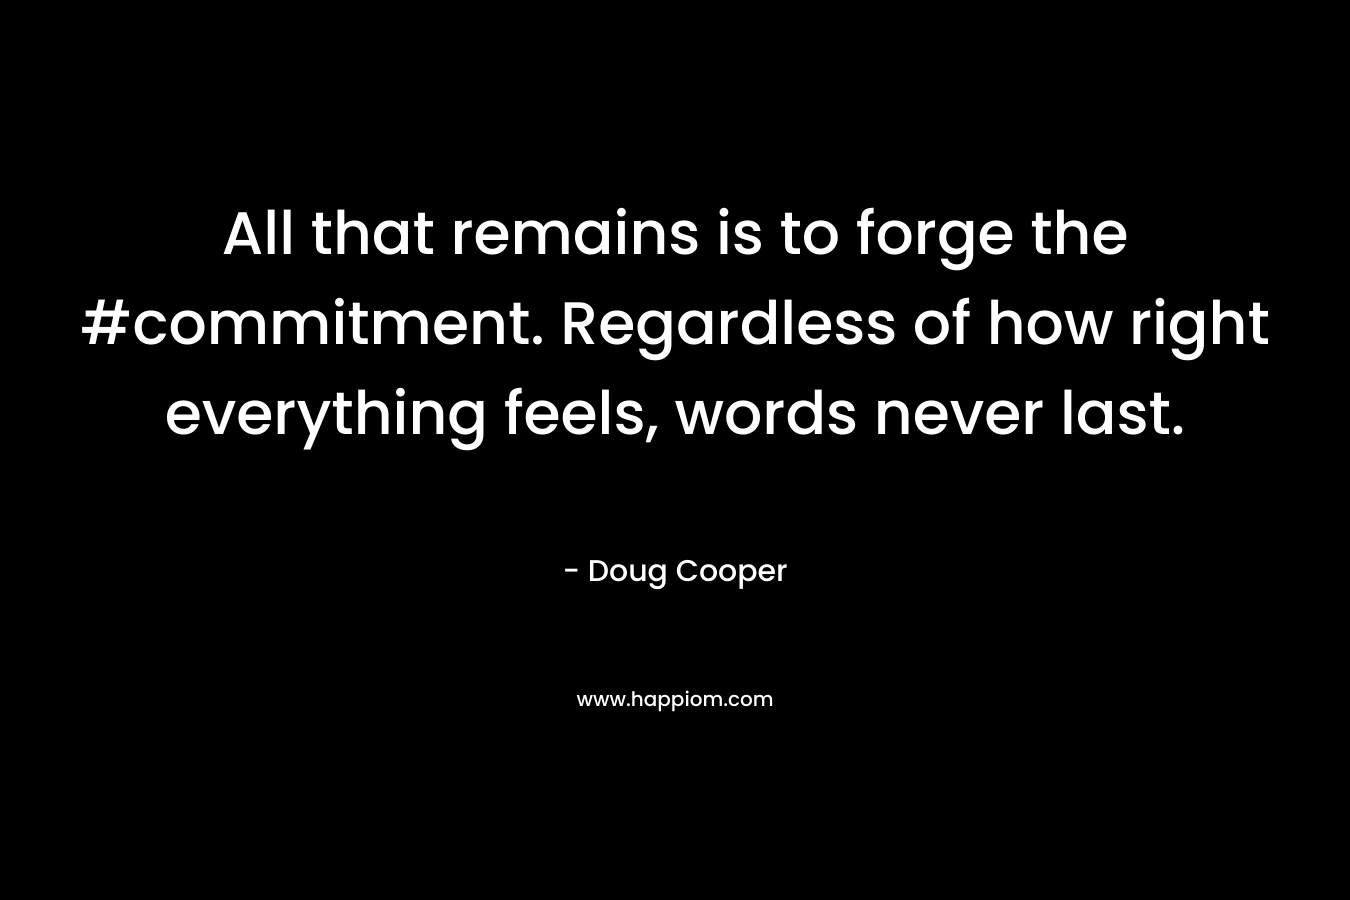 All that remains is to forge the #commitment. Regardless of how right everything feels, words never last.